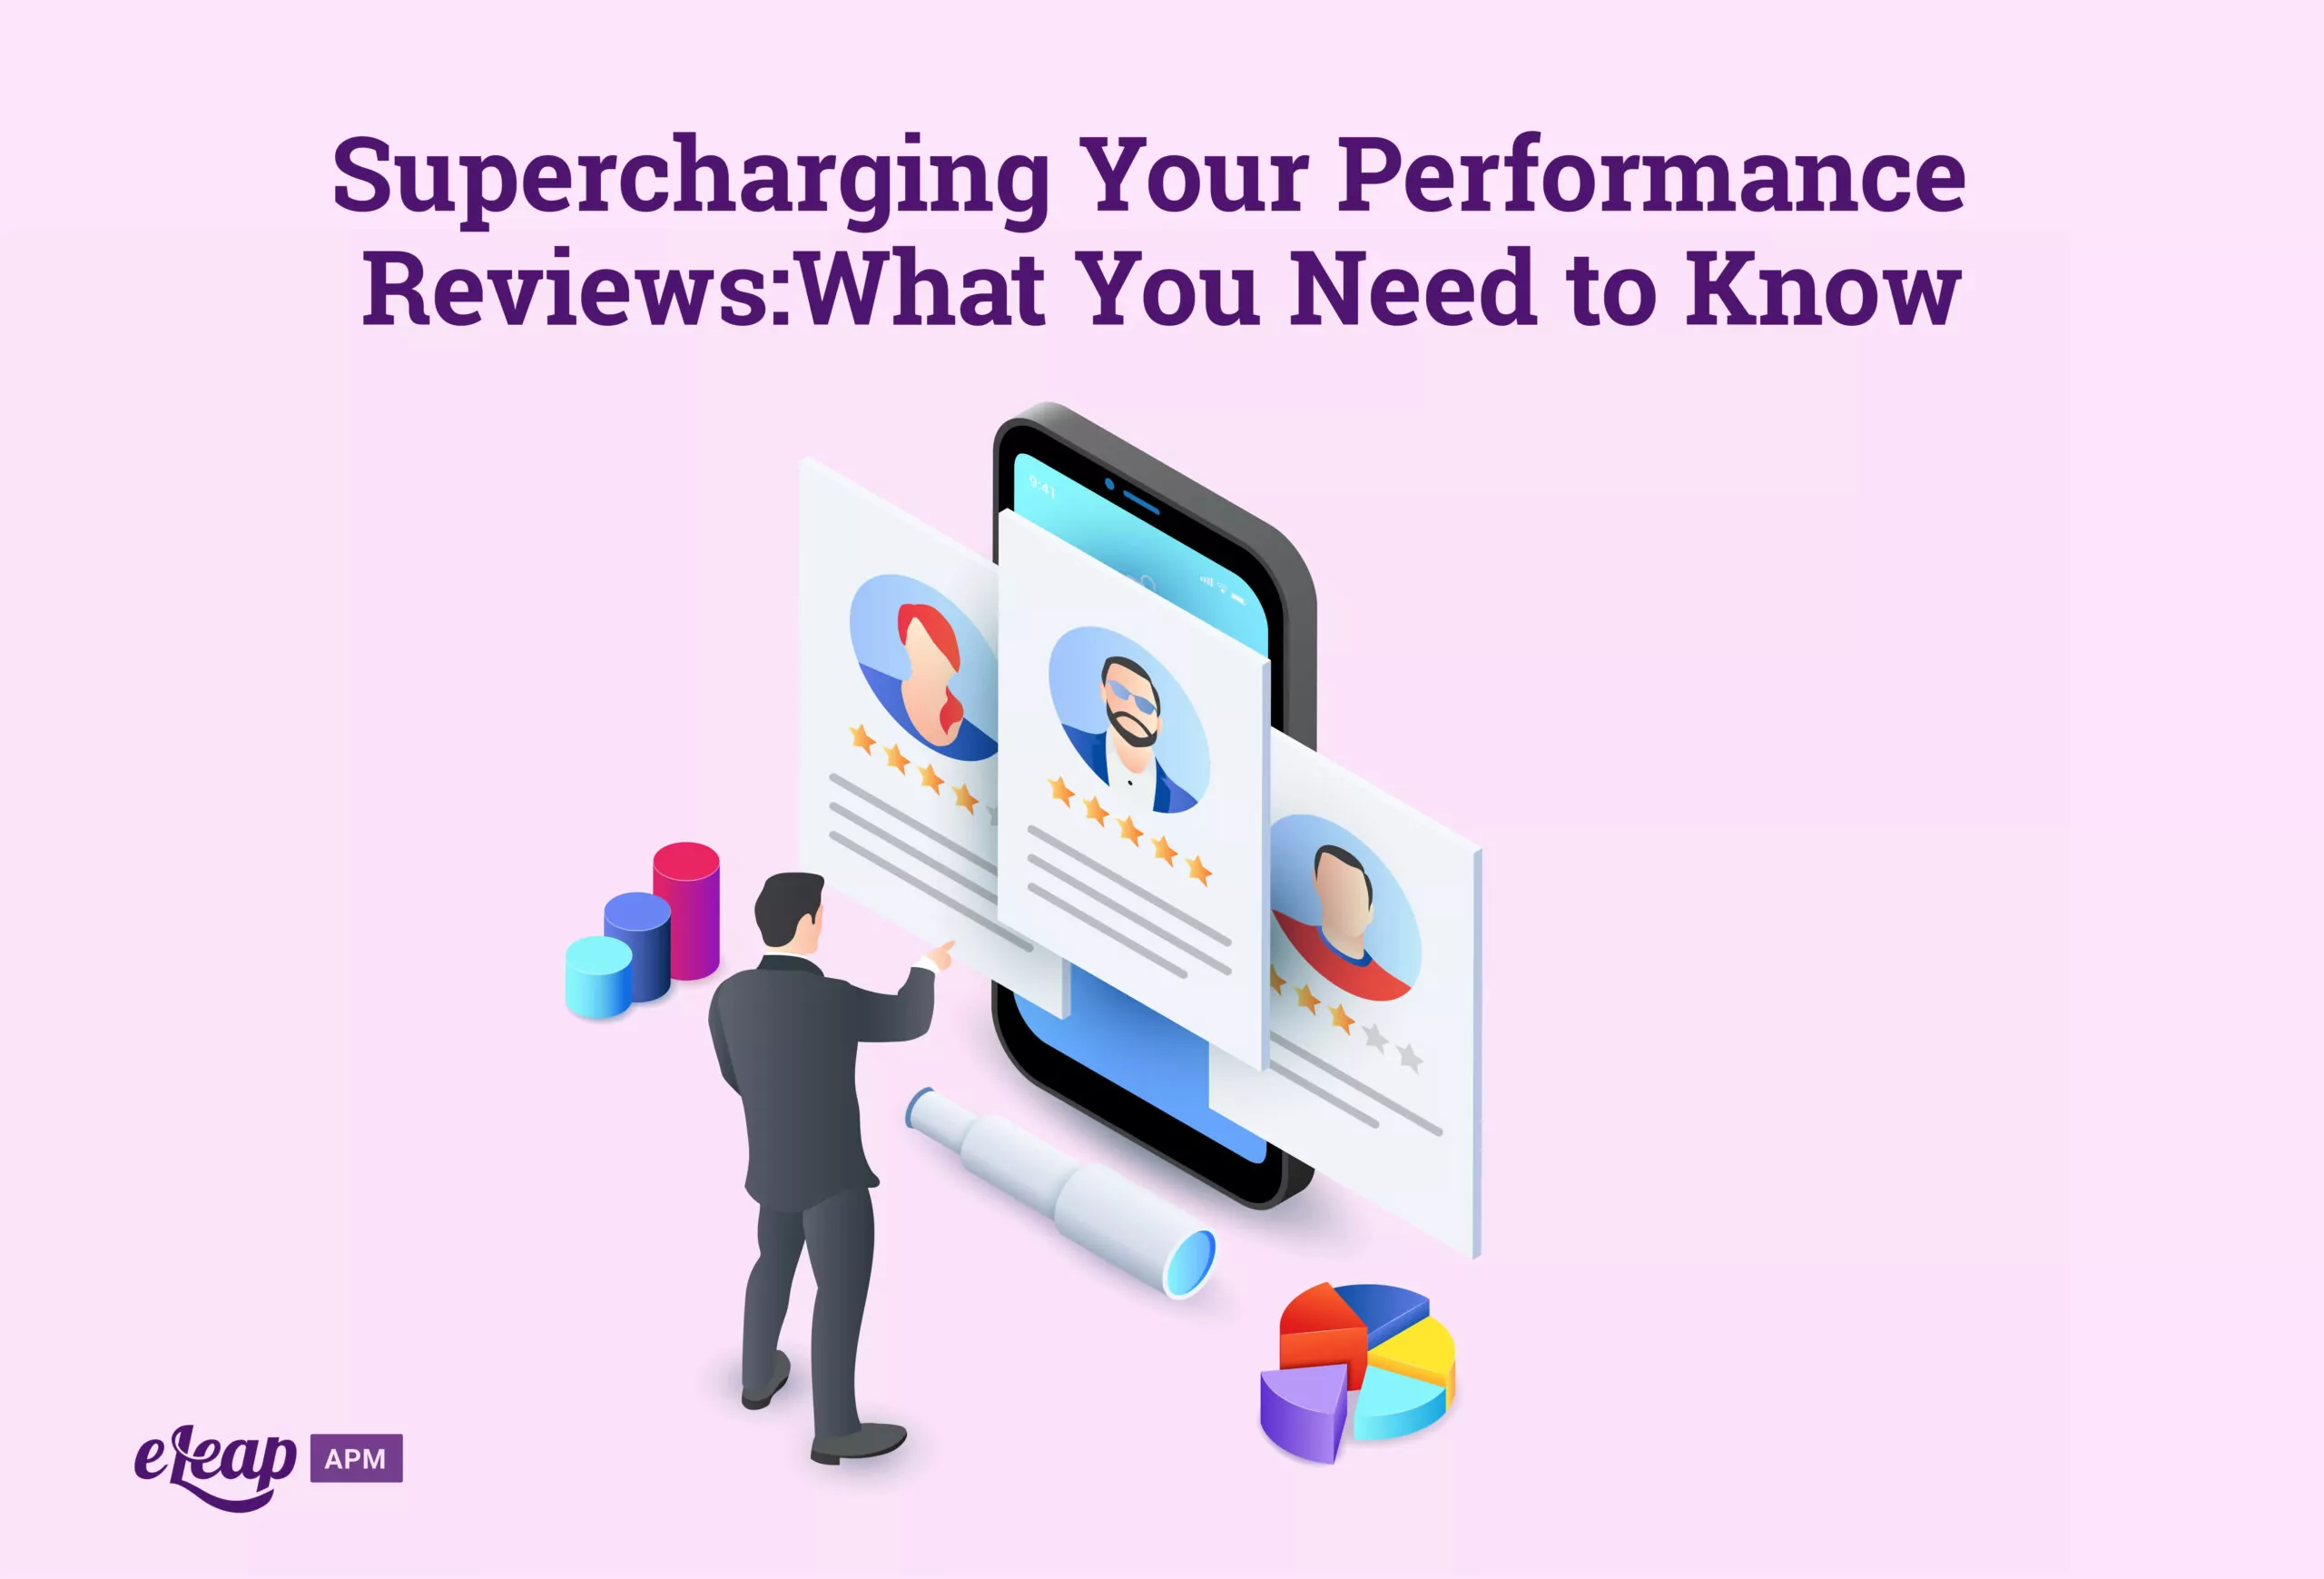 Supercharging Your Performance Reviews: What You Need to Know